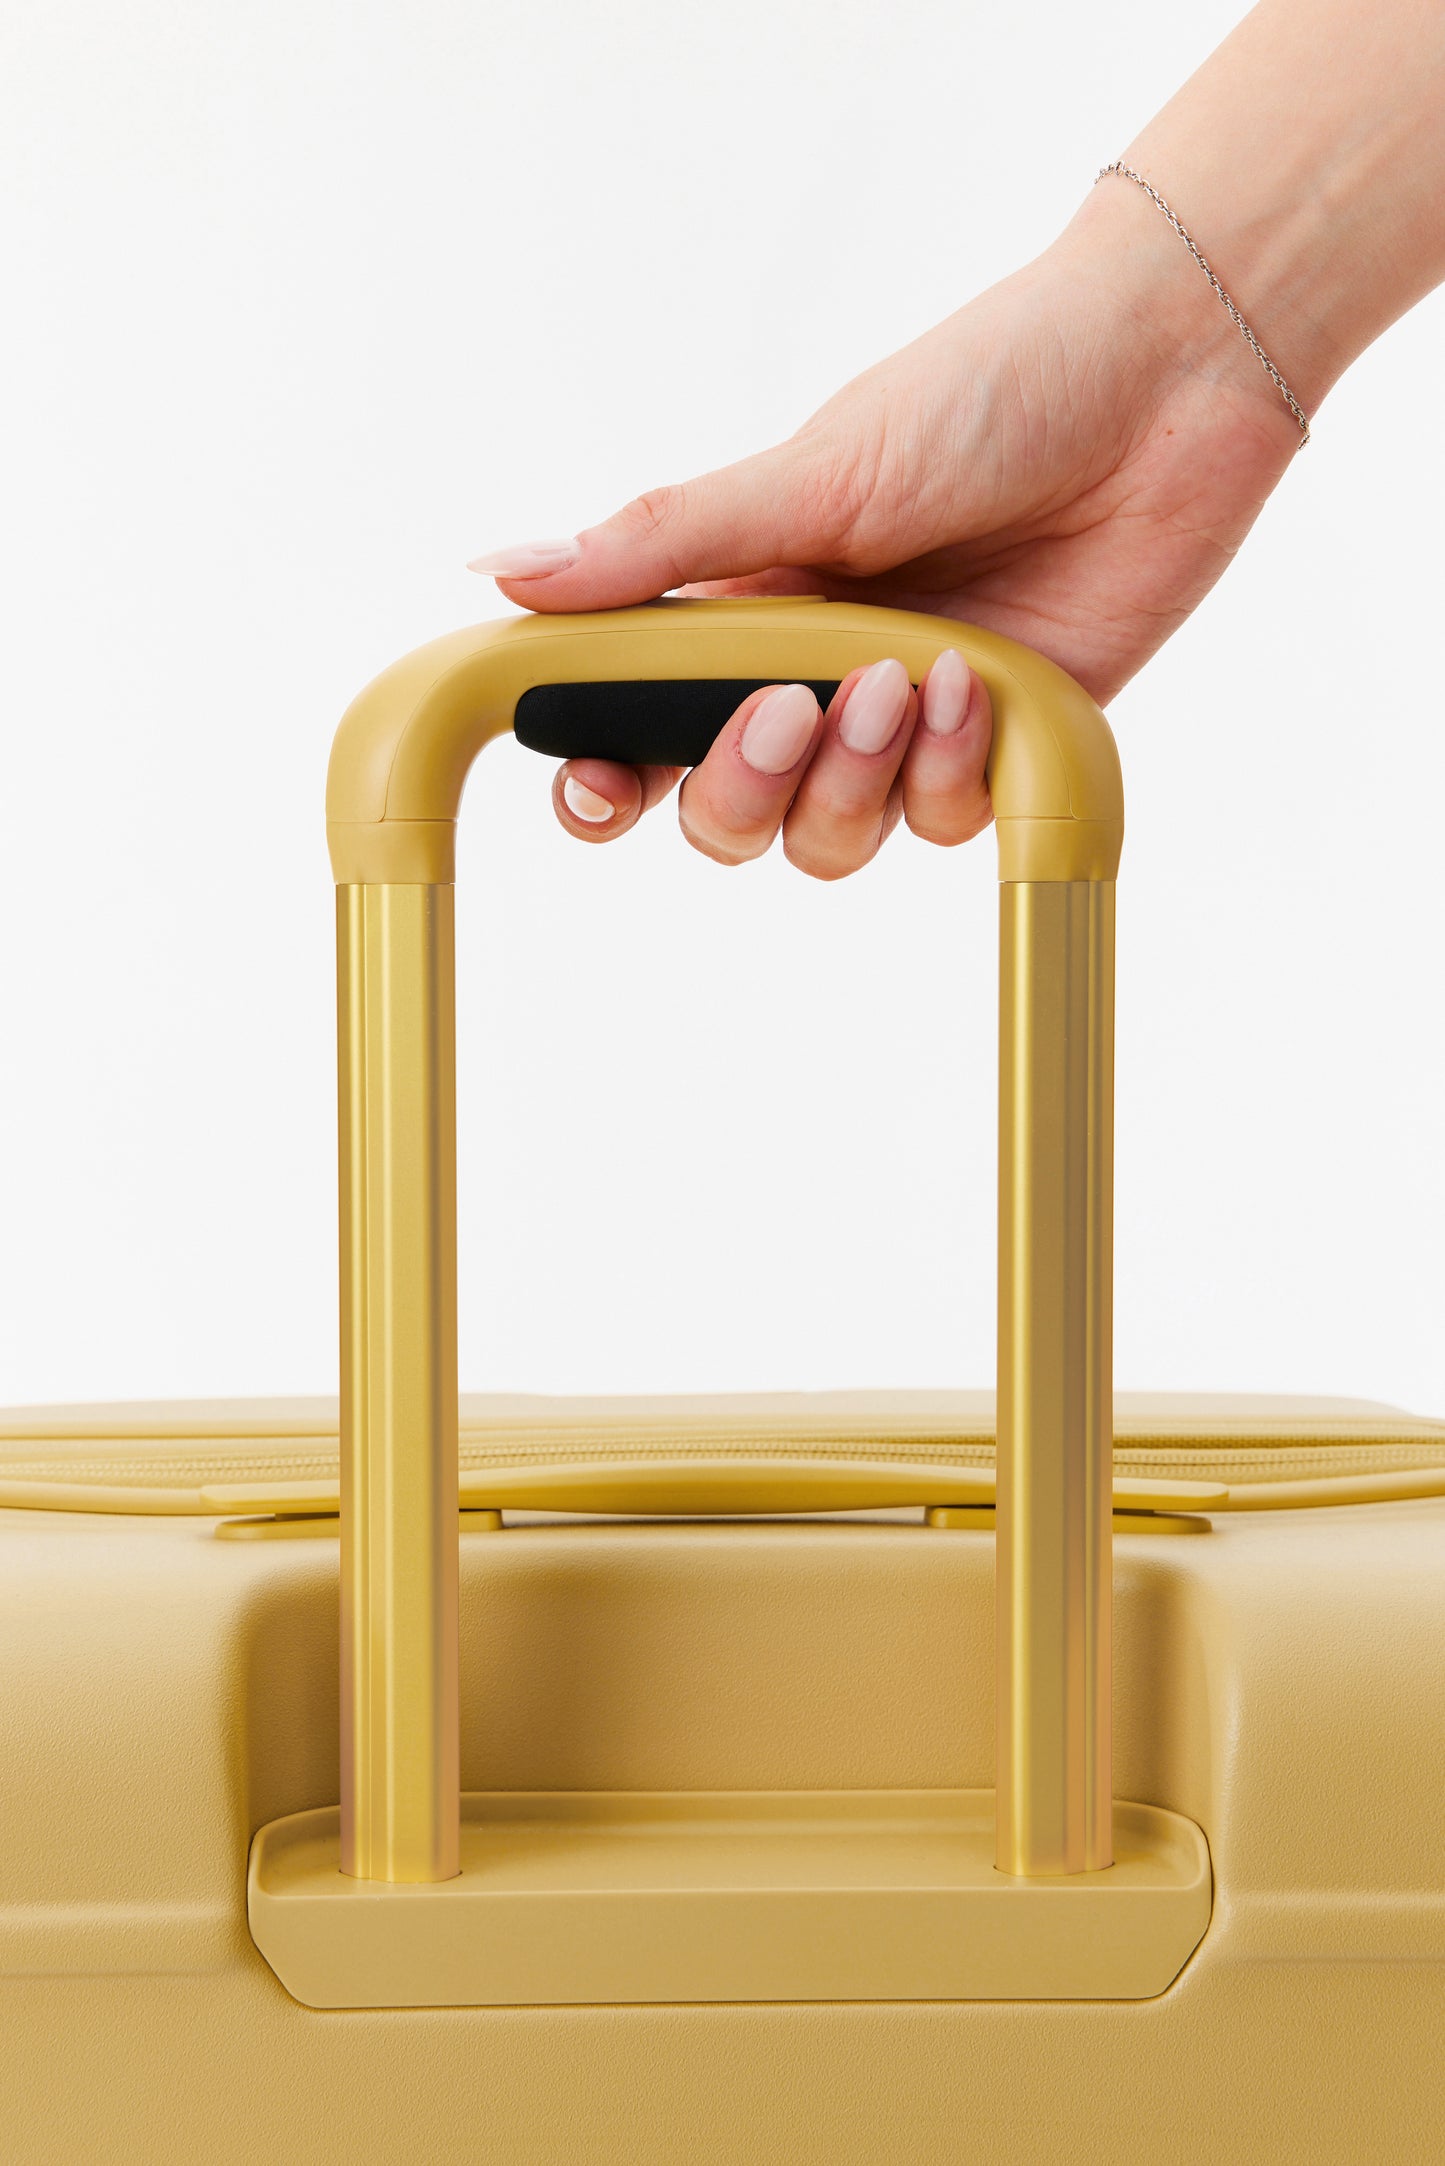 The Carry-On Roller in Honey